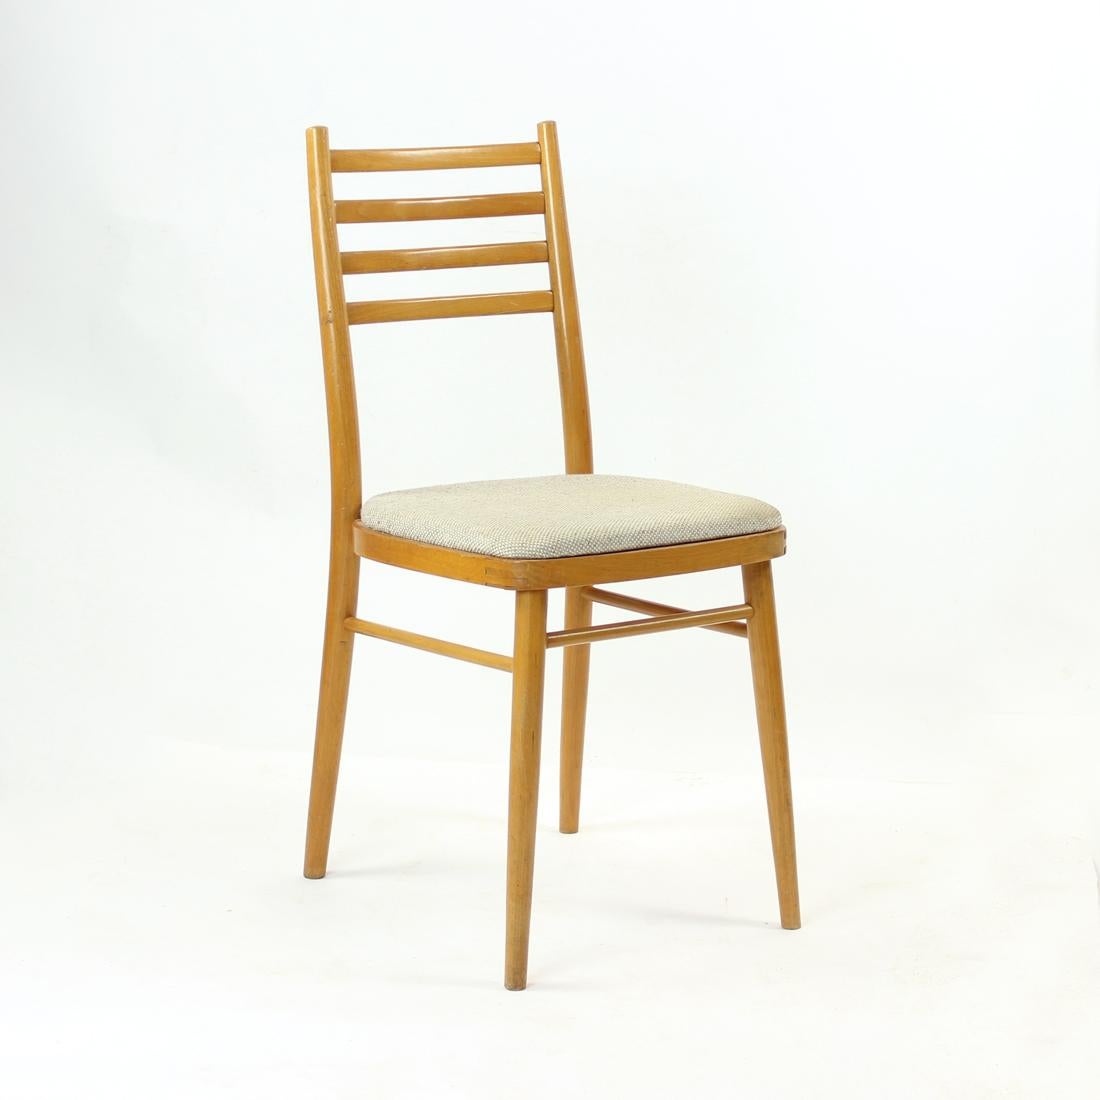 Mid-Century Modern Midcentury Chair in Blond Wood, Czechoslovakia, 1960s For Sale